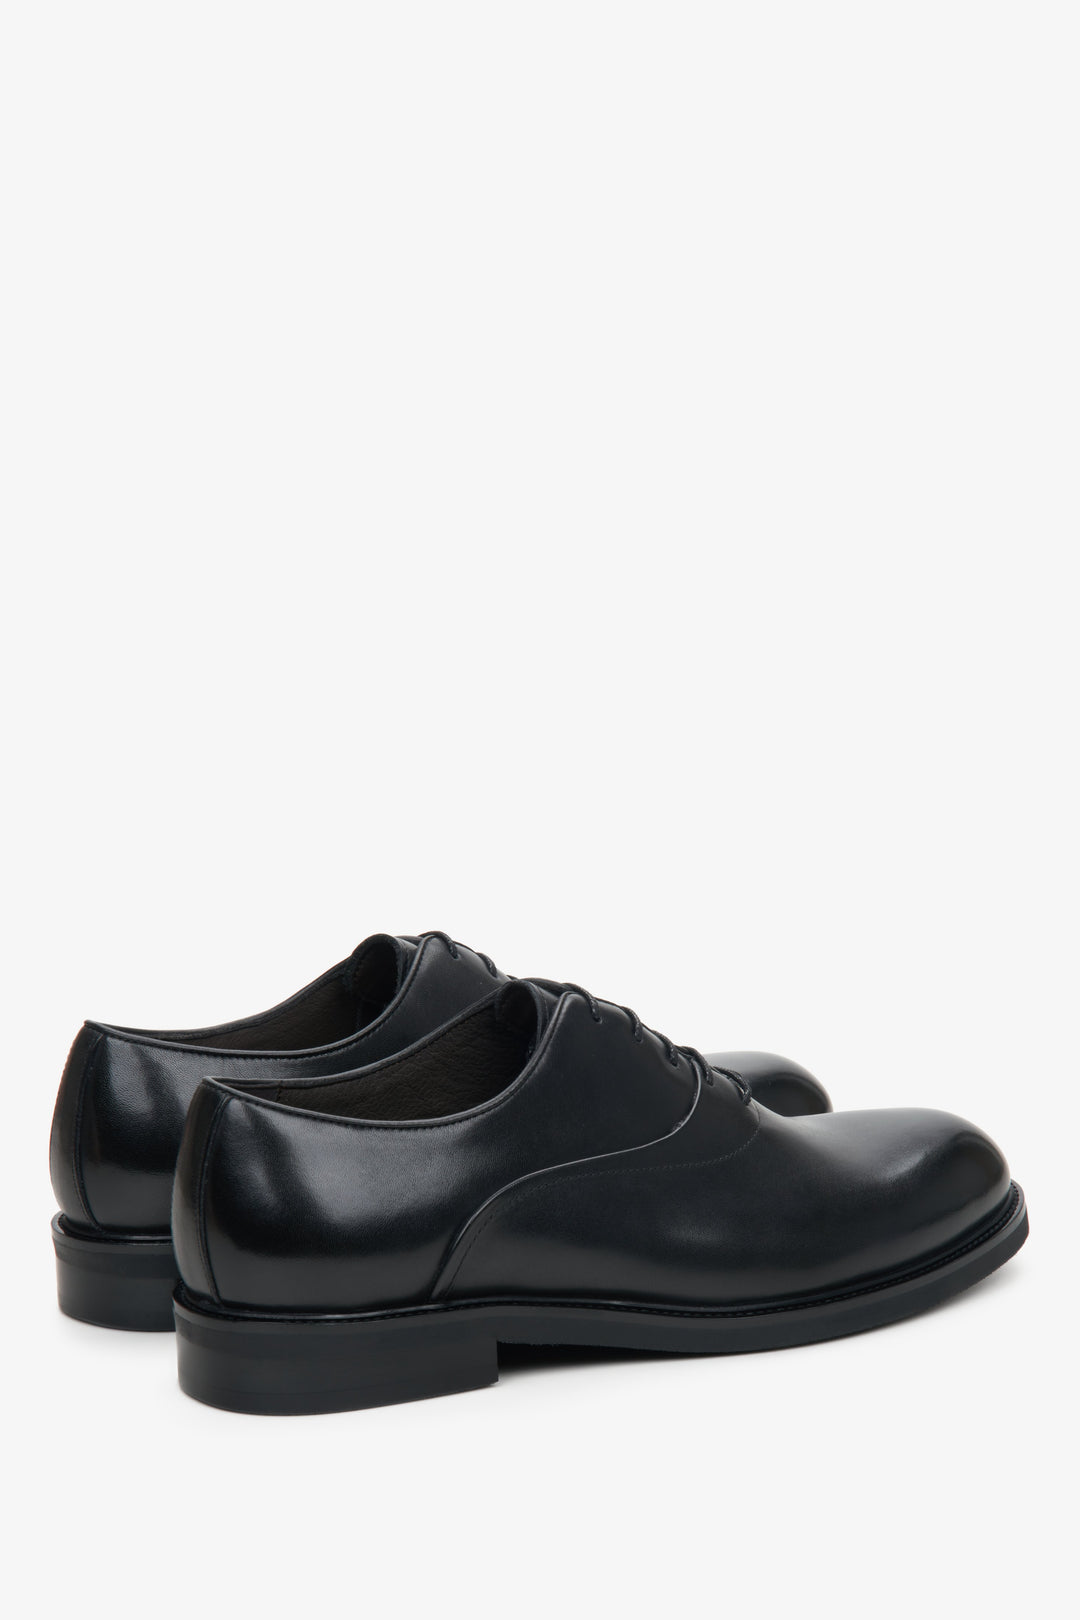 Men's black leather Oxford shoes by Estro - close-up on the side line and heel counter.